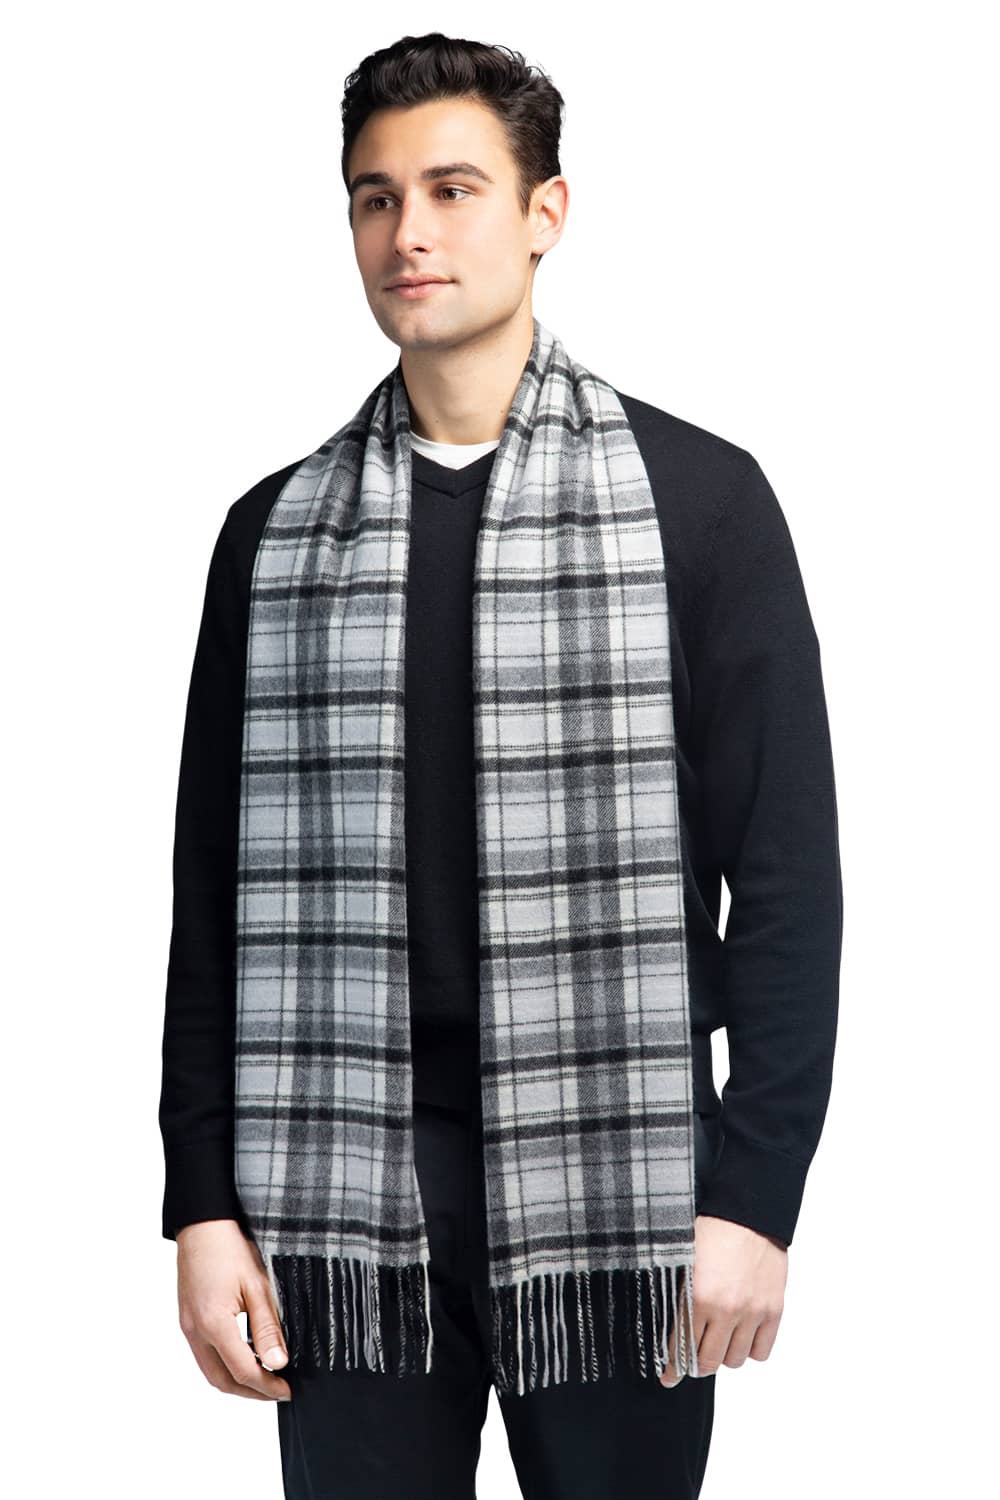 Men's Classic 100% Pure Cashmere Scarf Mens>Accessories>Scarf Fishers Finery Black White Gray Plaid One Size 